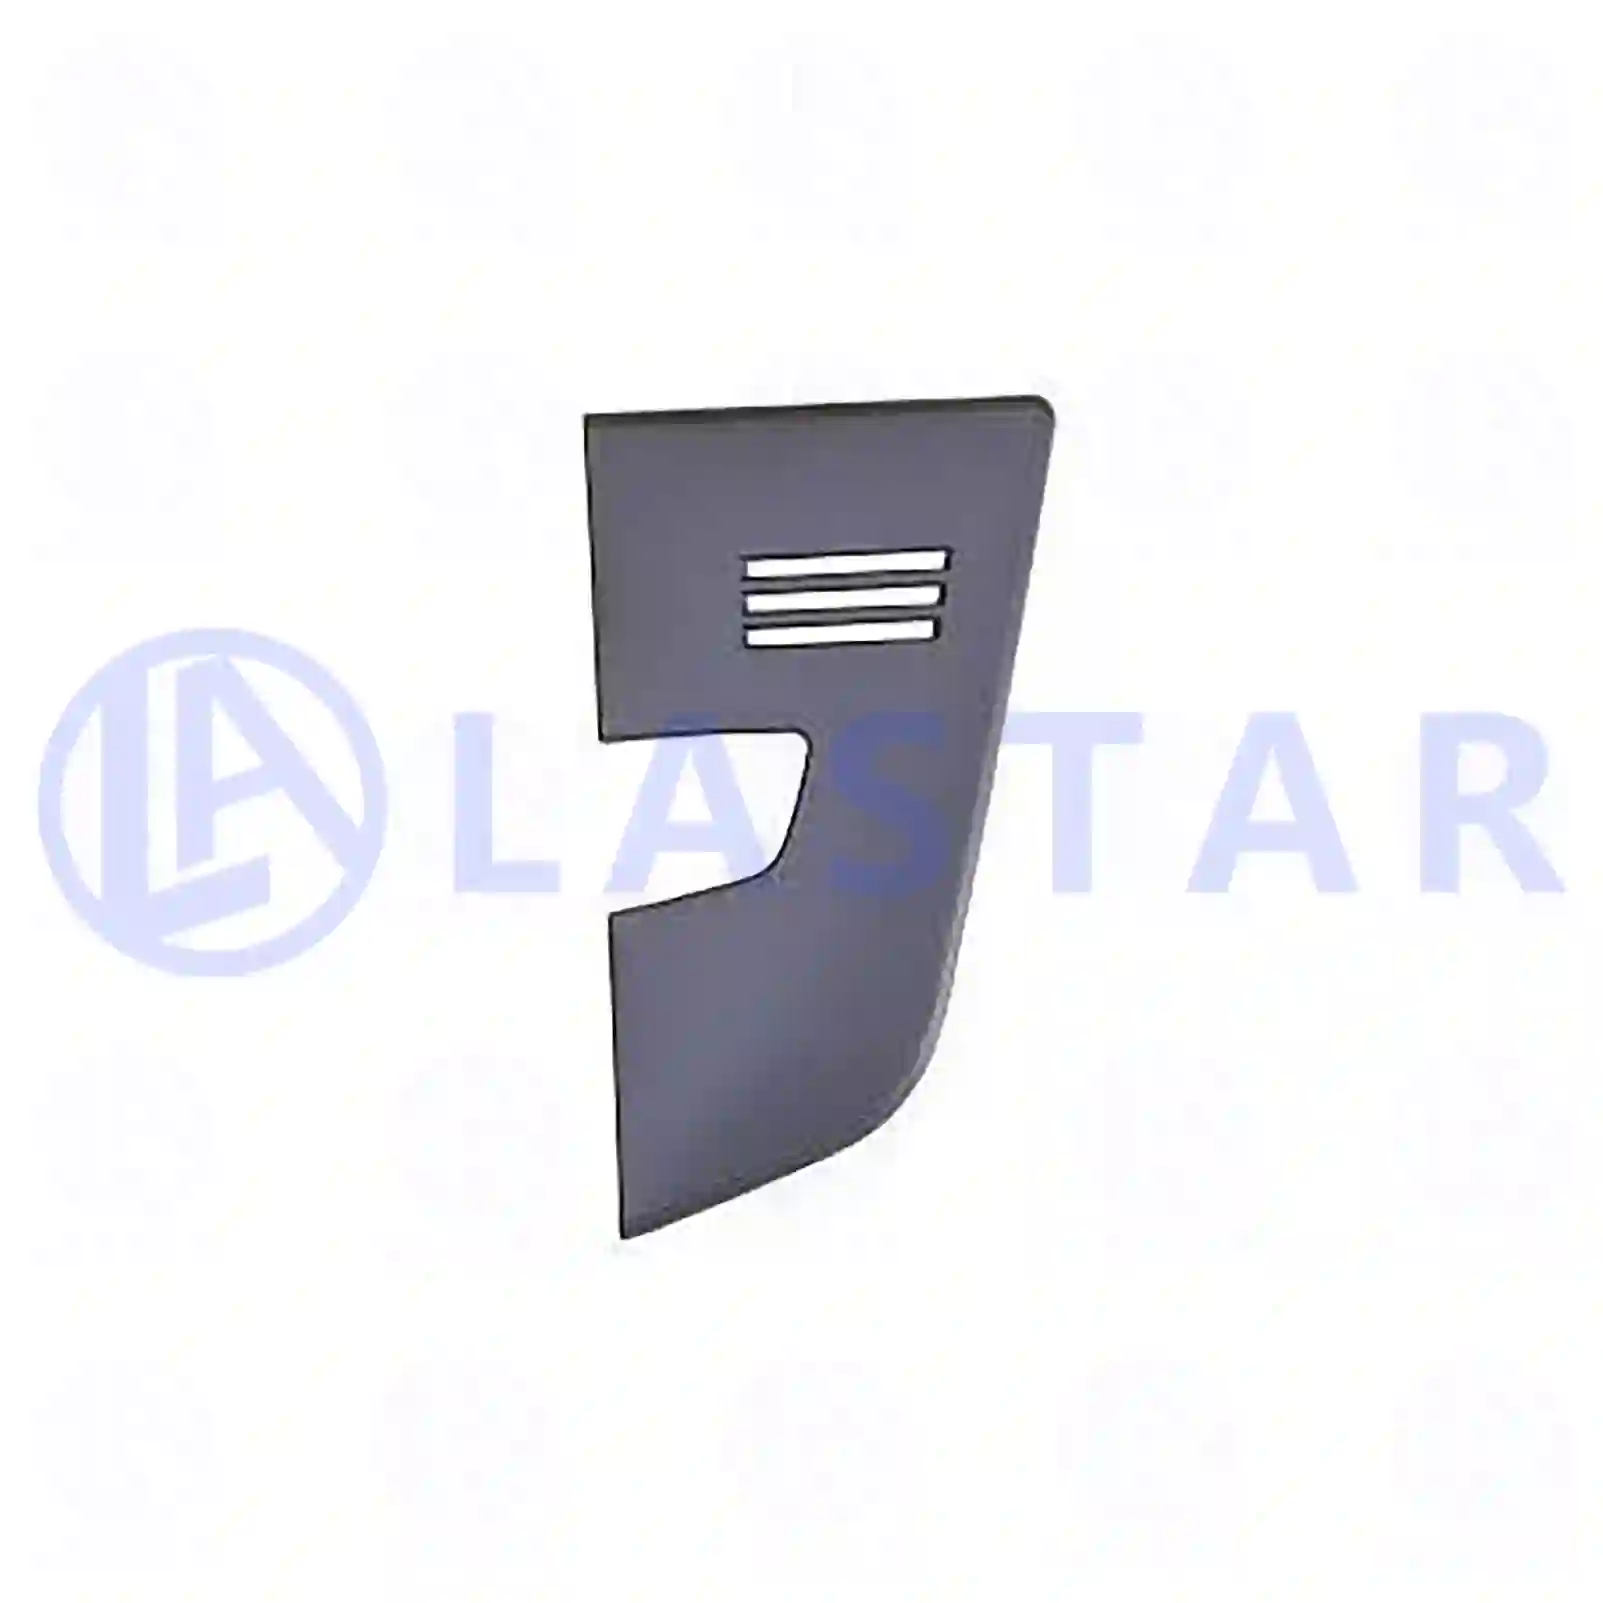 Cover, front grill, left, 77721087, 82062209, ZG60455-0008 ||  77721087 Lastar Spare Part | Truck Spare Parts, Auotomotive Spare Parts Cover, front grill, left, 77721087, 82062209, ZG60455-0008 ||  77721087 Lastar Spare Part | Truck Spare Parts, Auotomotive Spare Parts